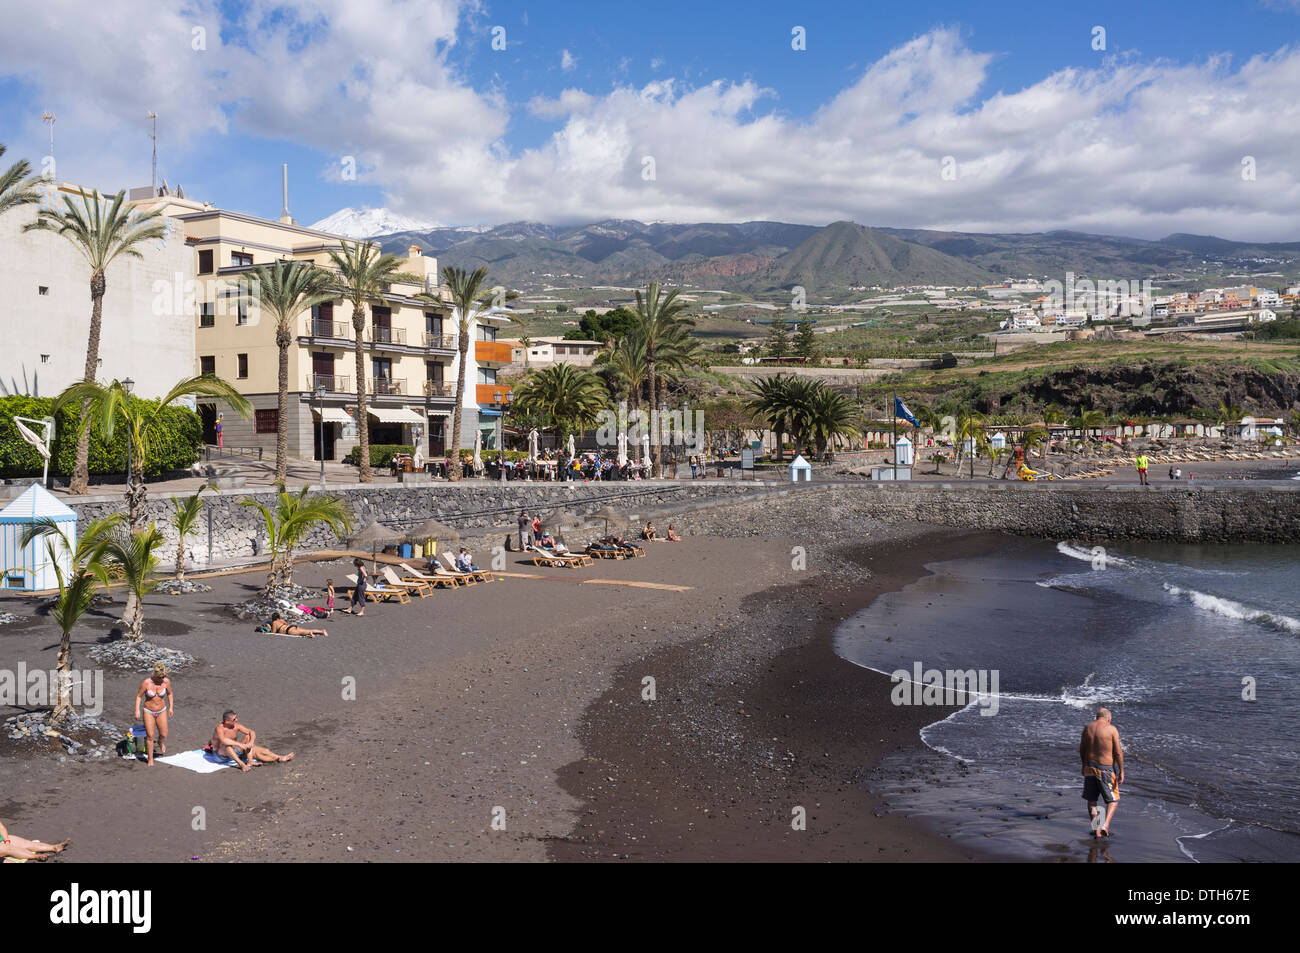 On the small beach at Playa San Juan with snow on Teide in the mountains behind, Tenerife, Canary Islands, Spain Stock Photo